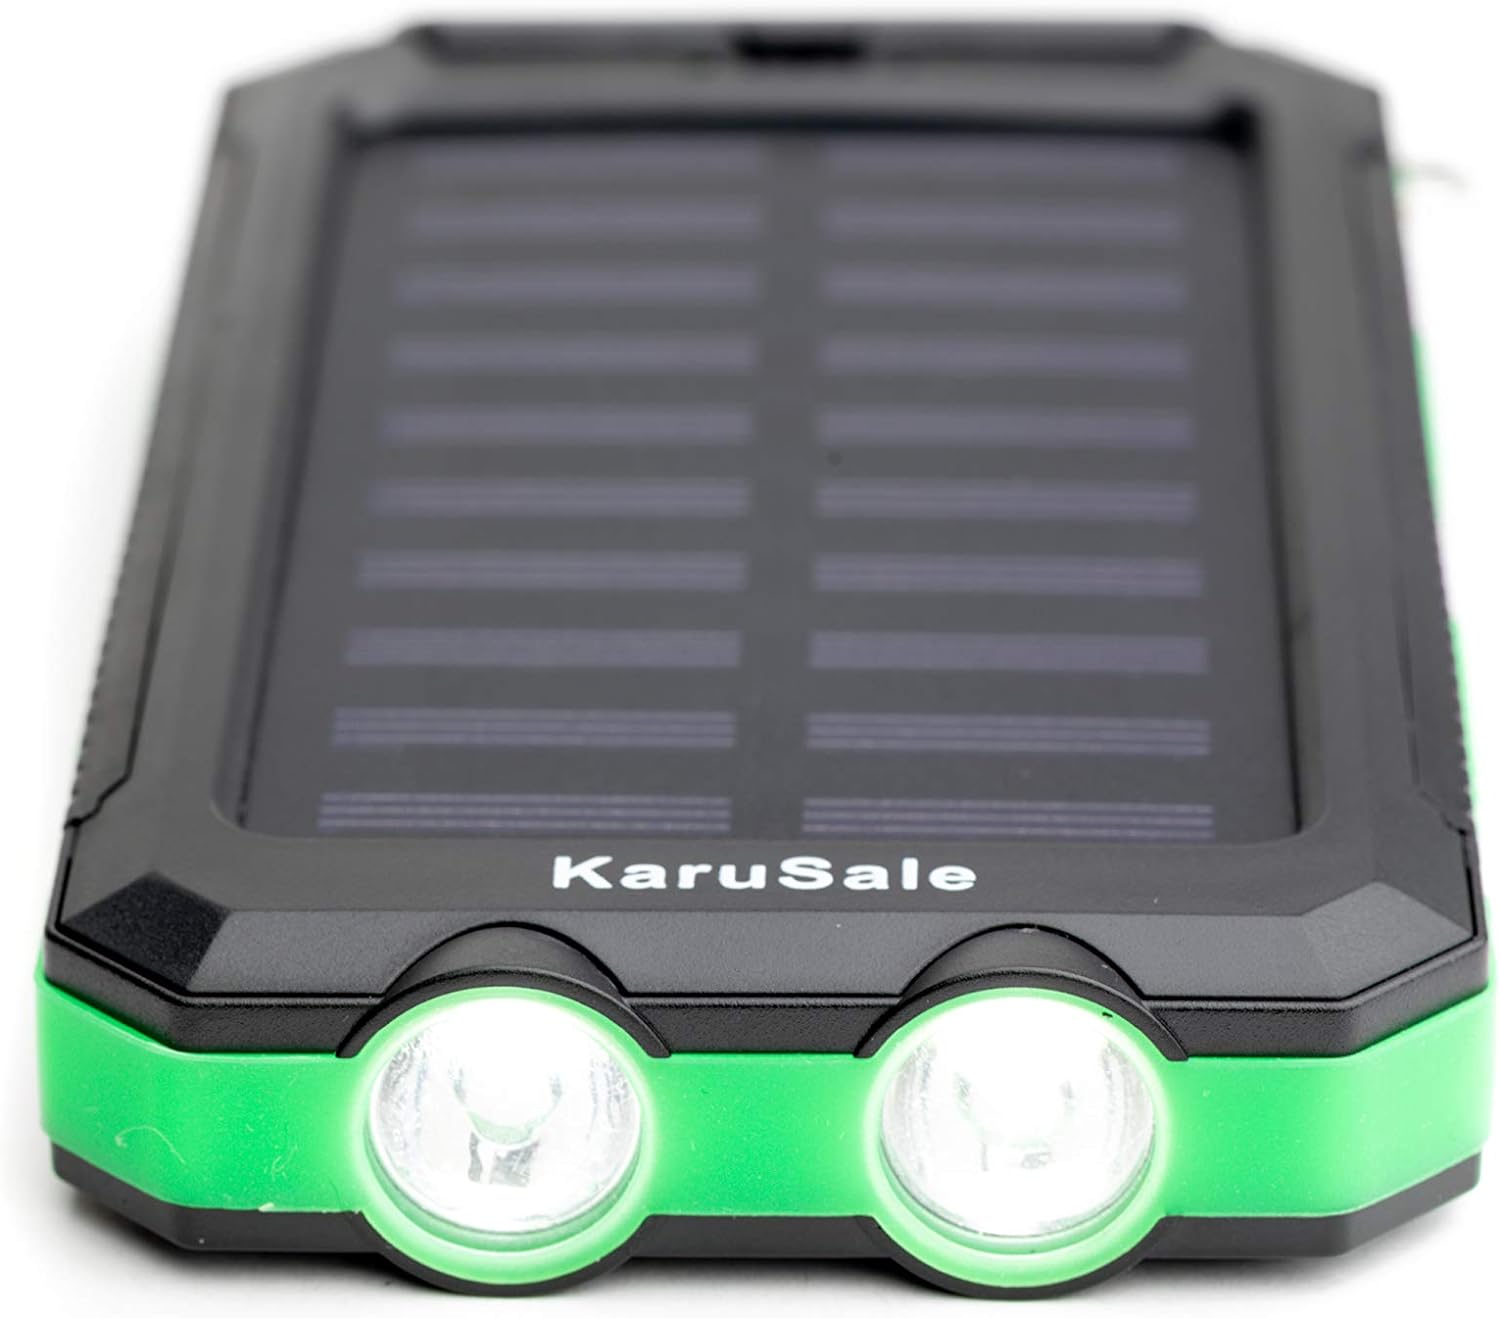 Karusale Solar Power Bank Portable Charger 50000Mah Battery Pack 2 LED 2 USB